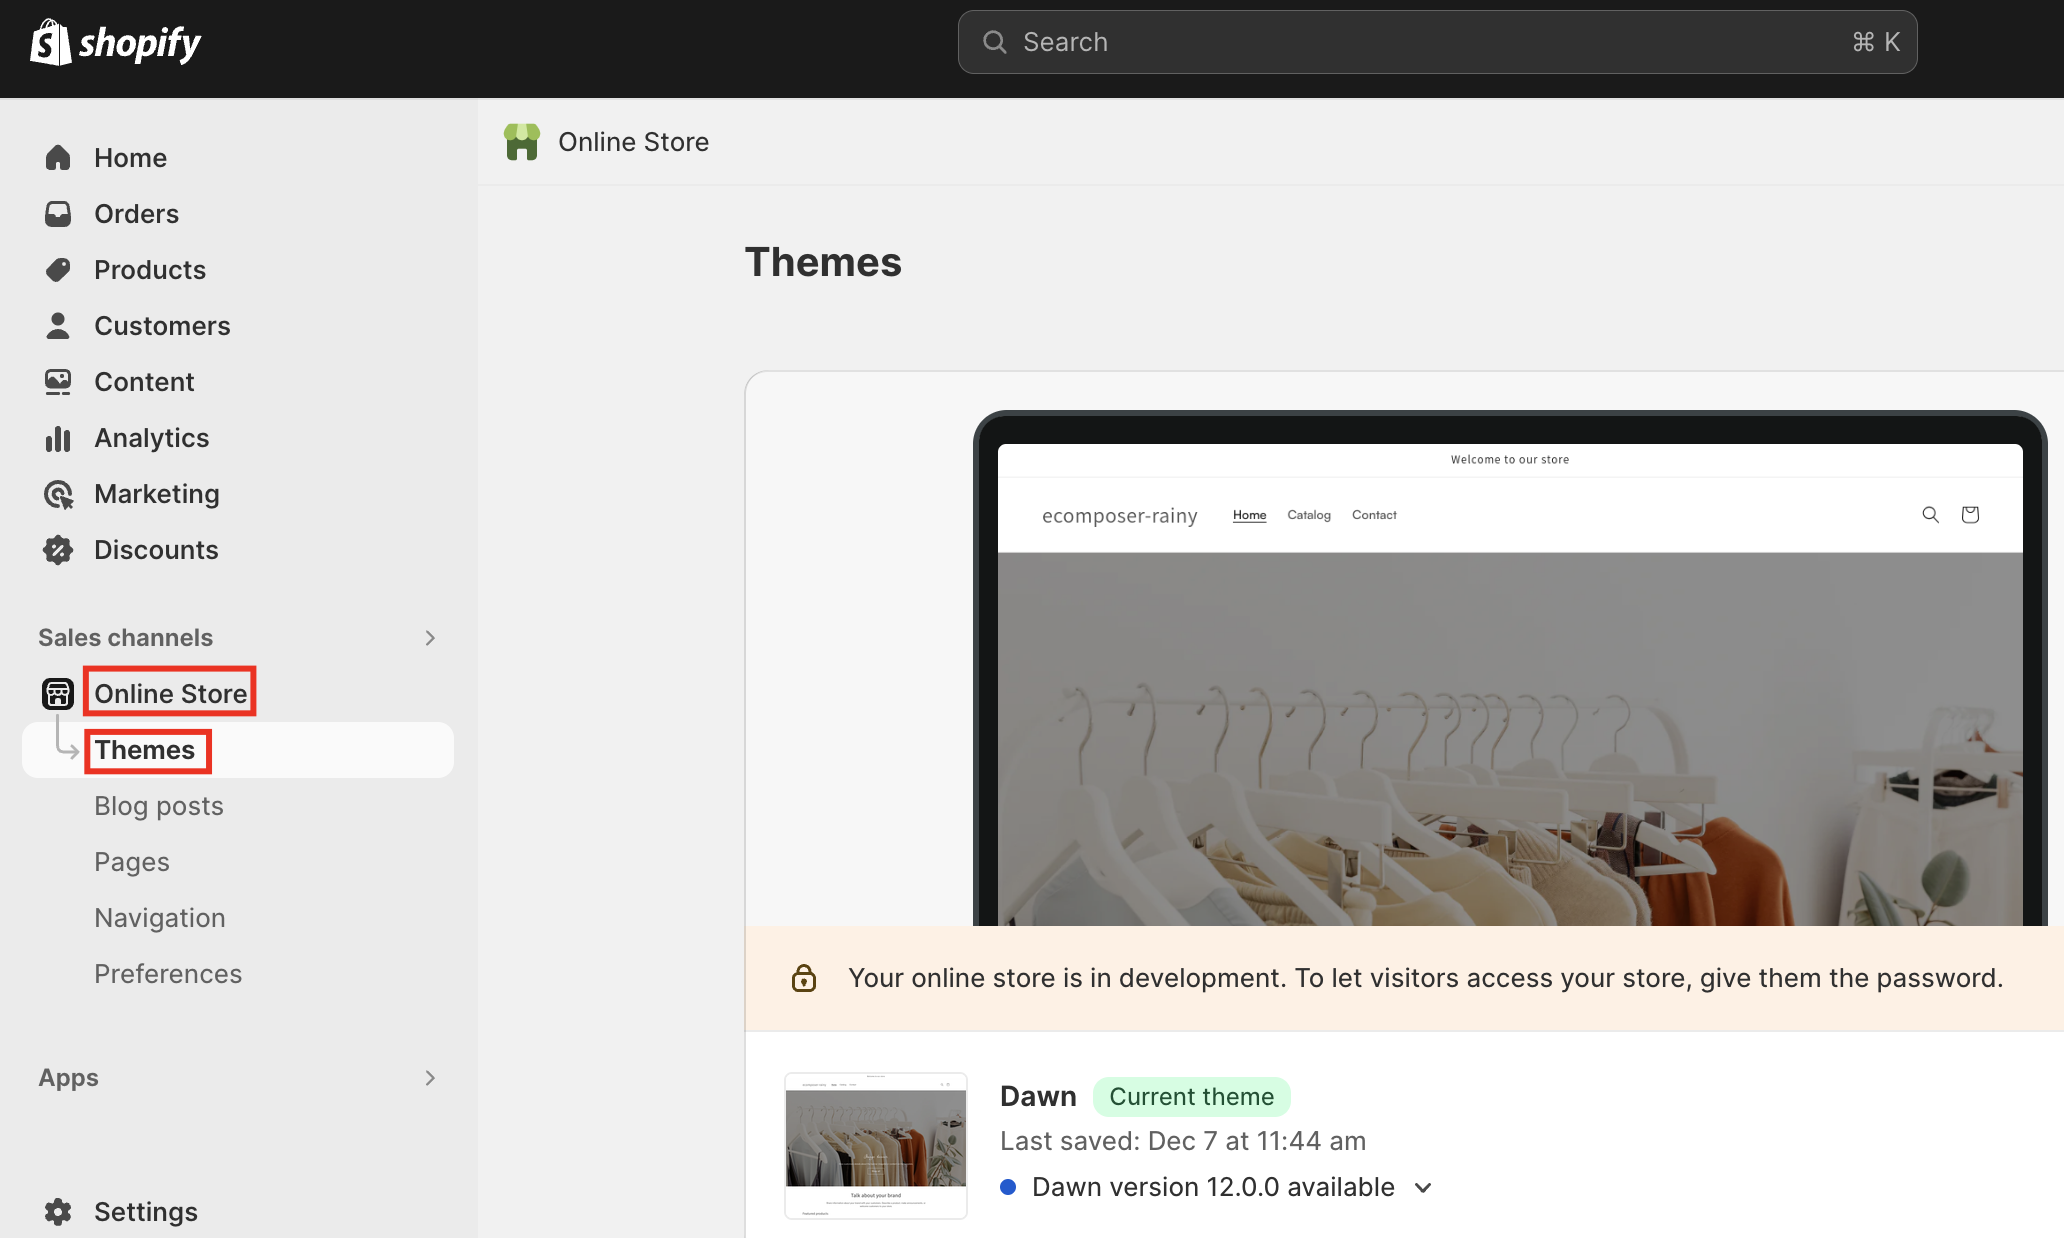 Navigate to the “Themes” section and Explore the theme store